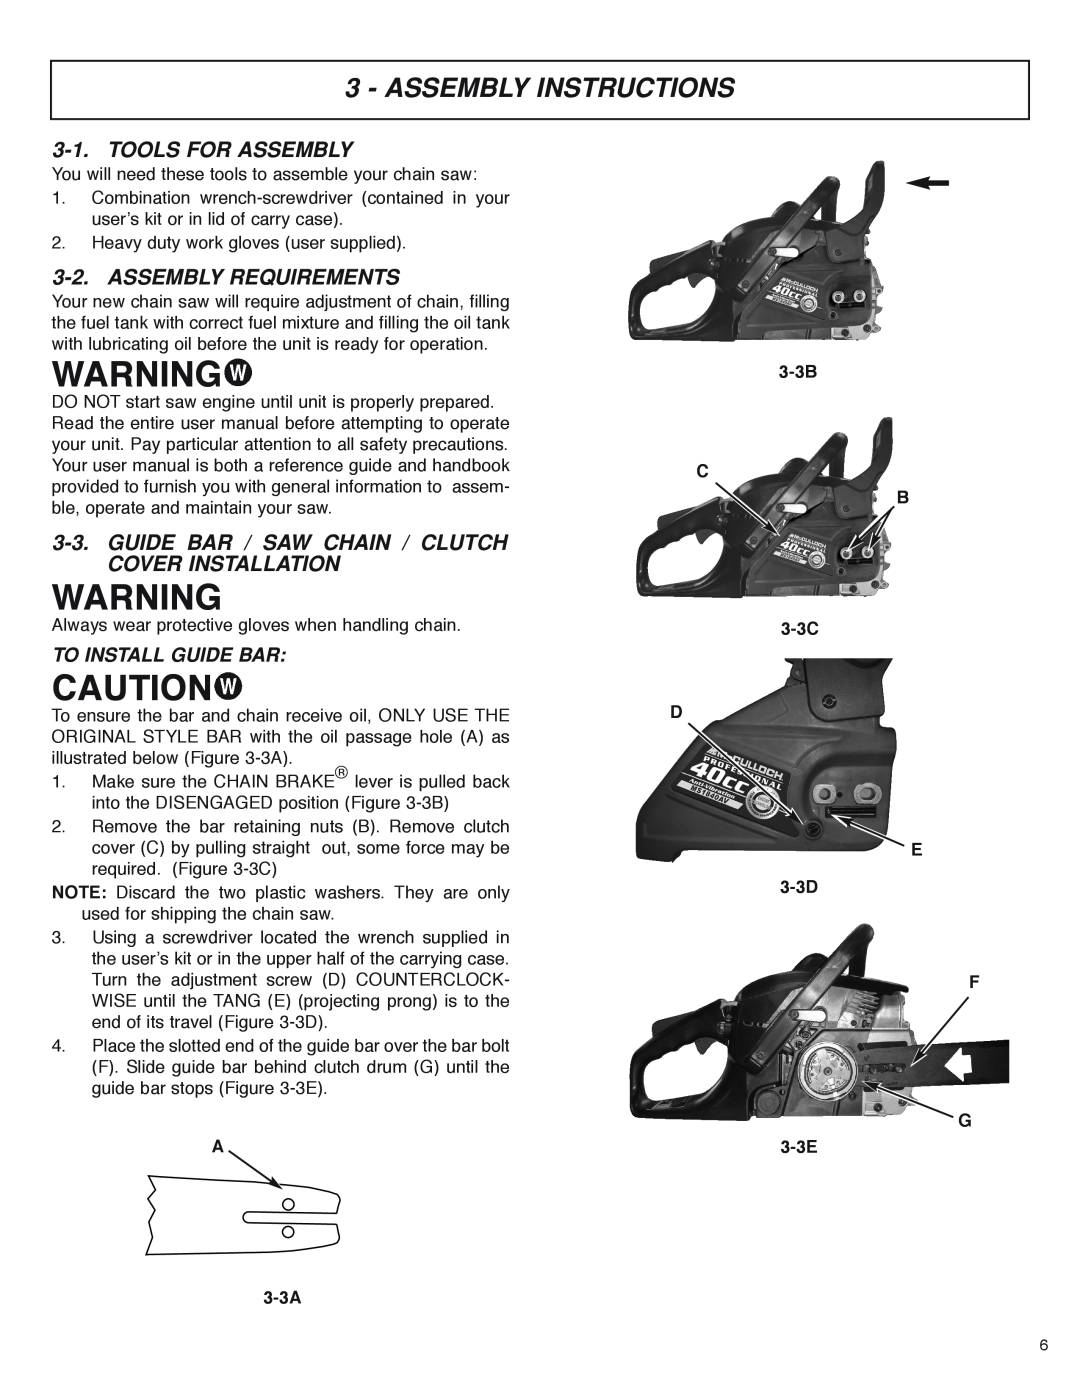 McCulloch MS4016PAVCC, MS4018PAVCC Assembly Instructions, Tools For Assembly, Assembly Requirements, To Install Guide Bar 